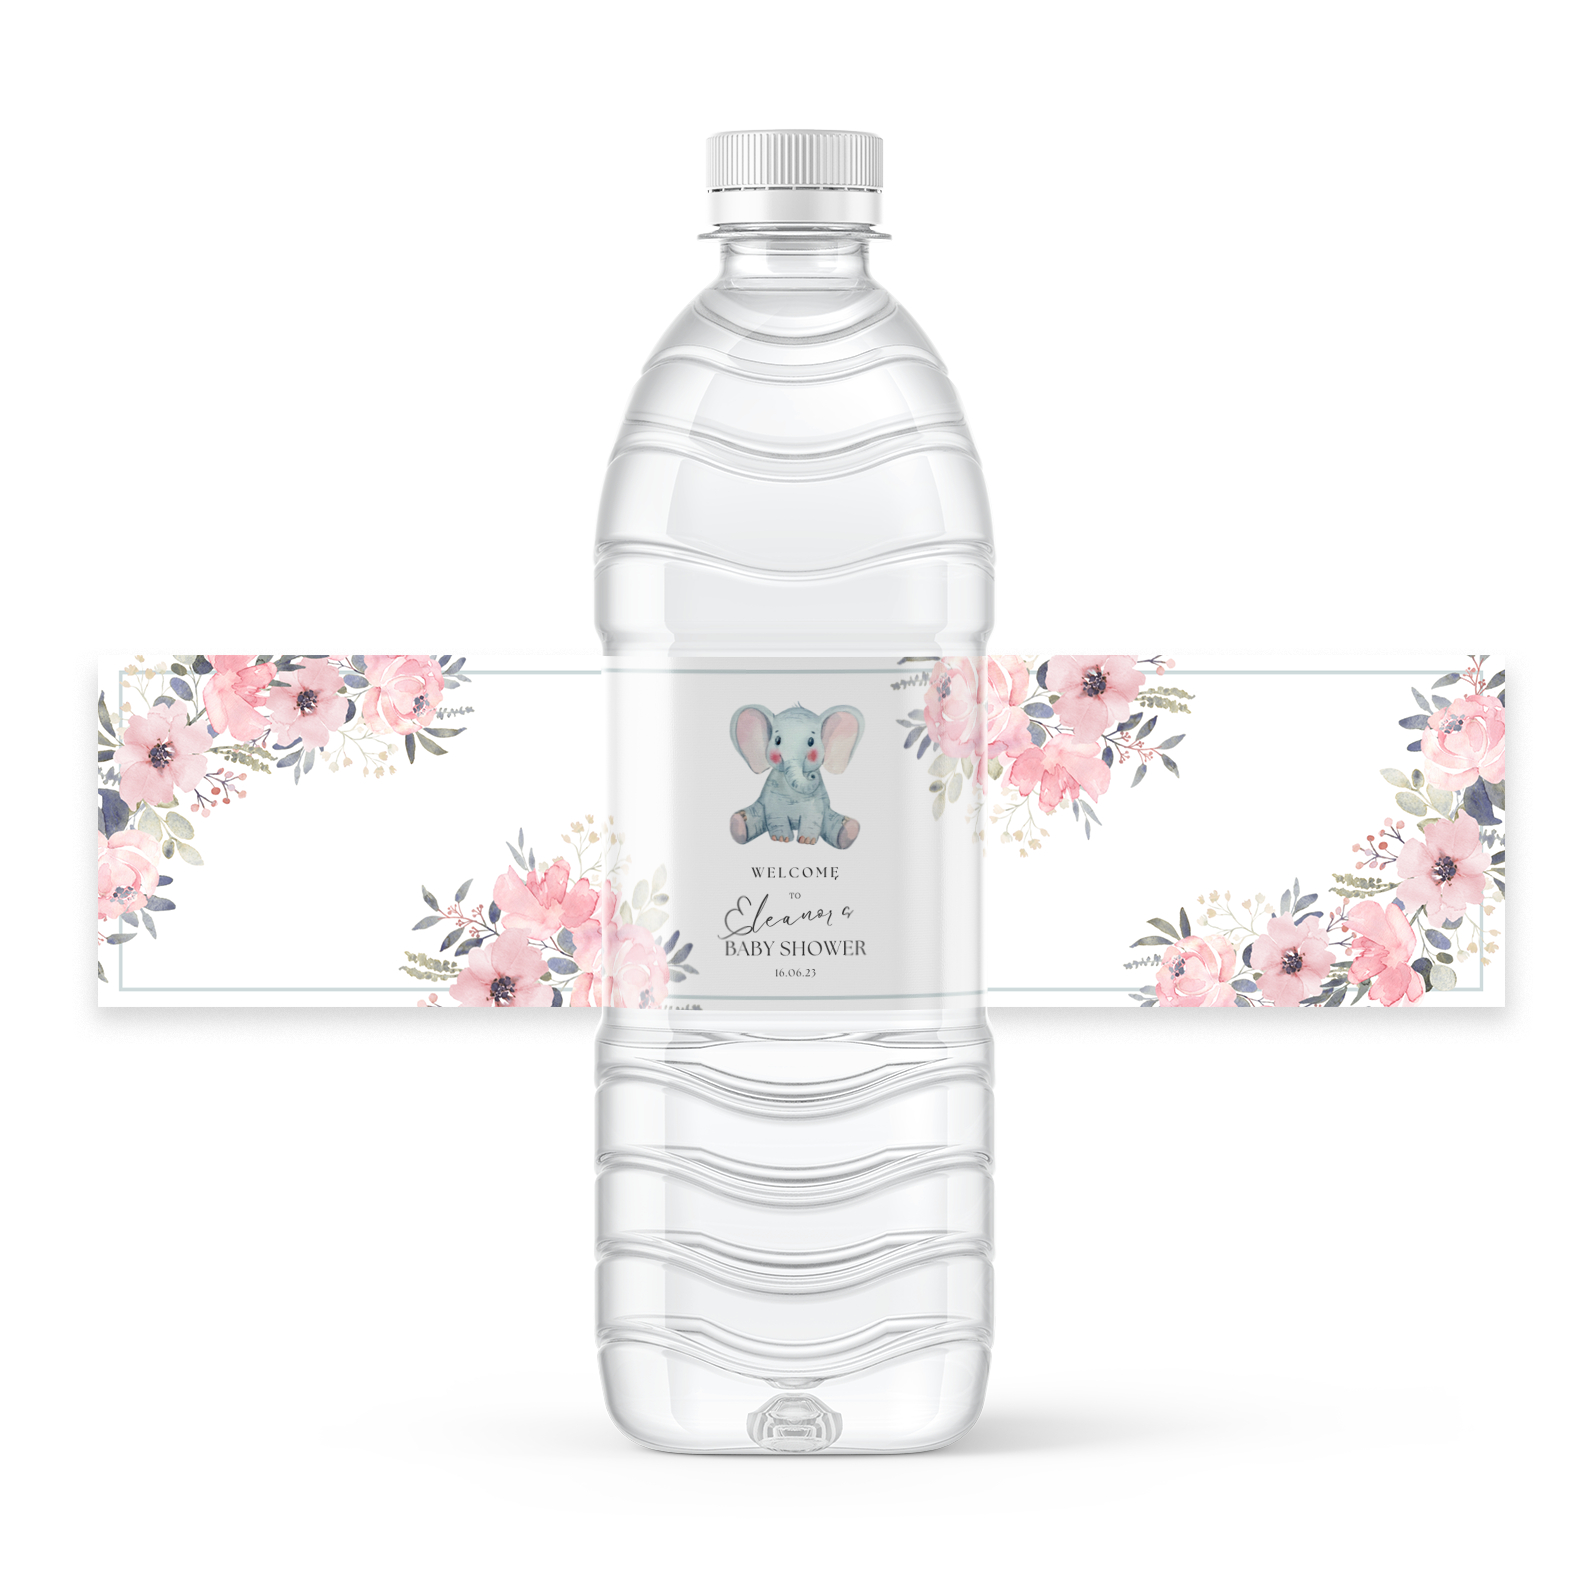 Free Pink Elephant Floral Baby Shower Design For 8X2 Inch Water for Free Printable Baby Shower Label Templates